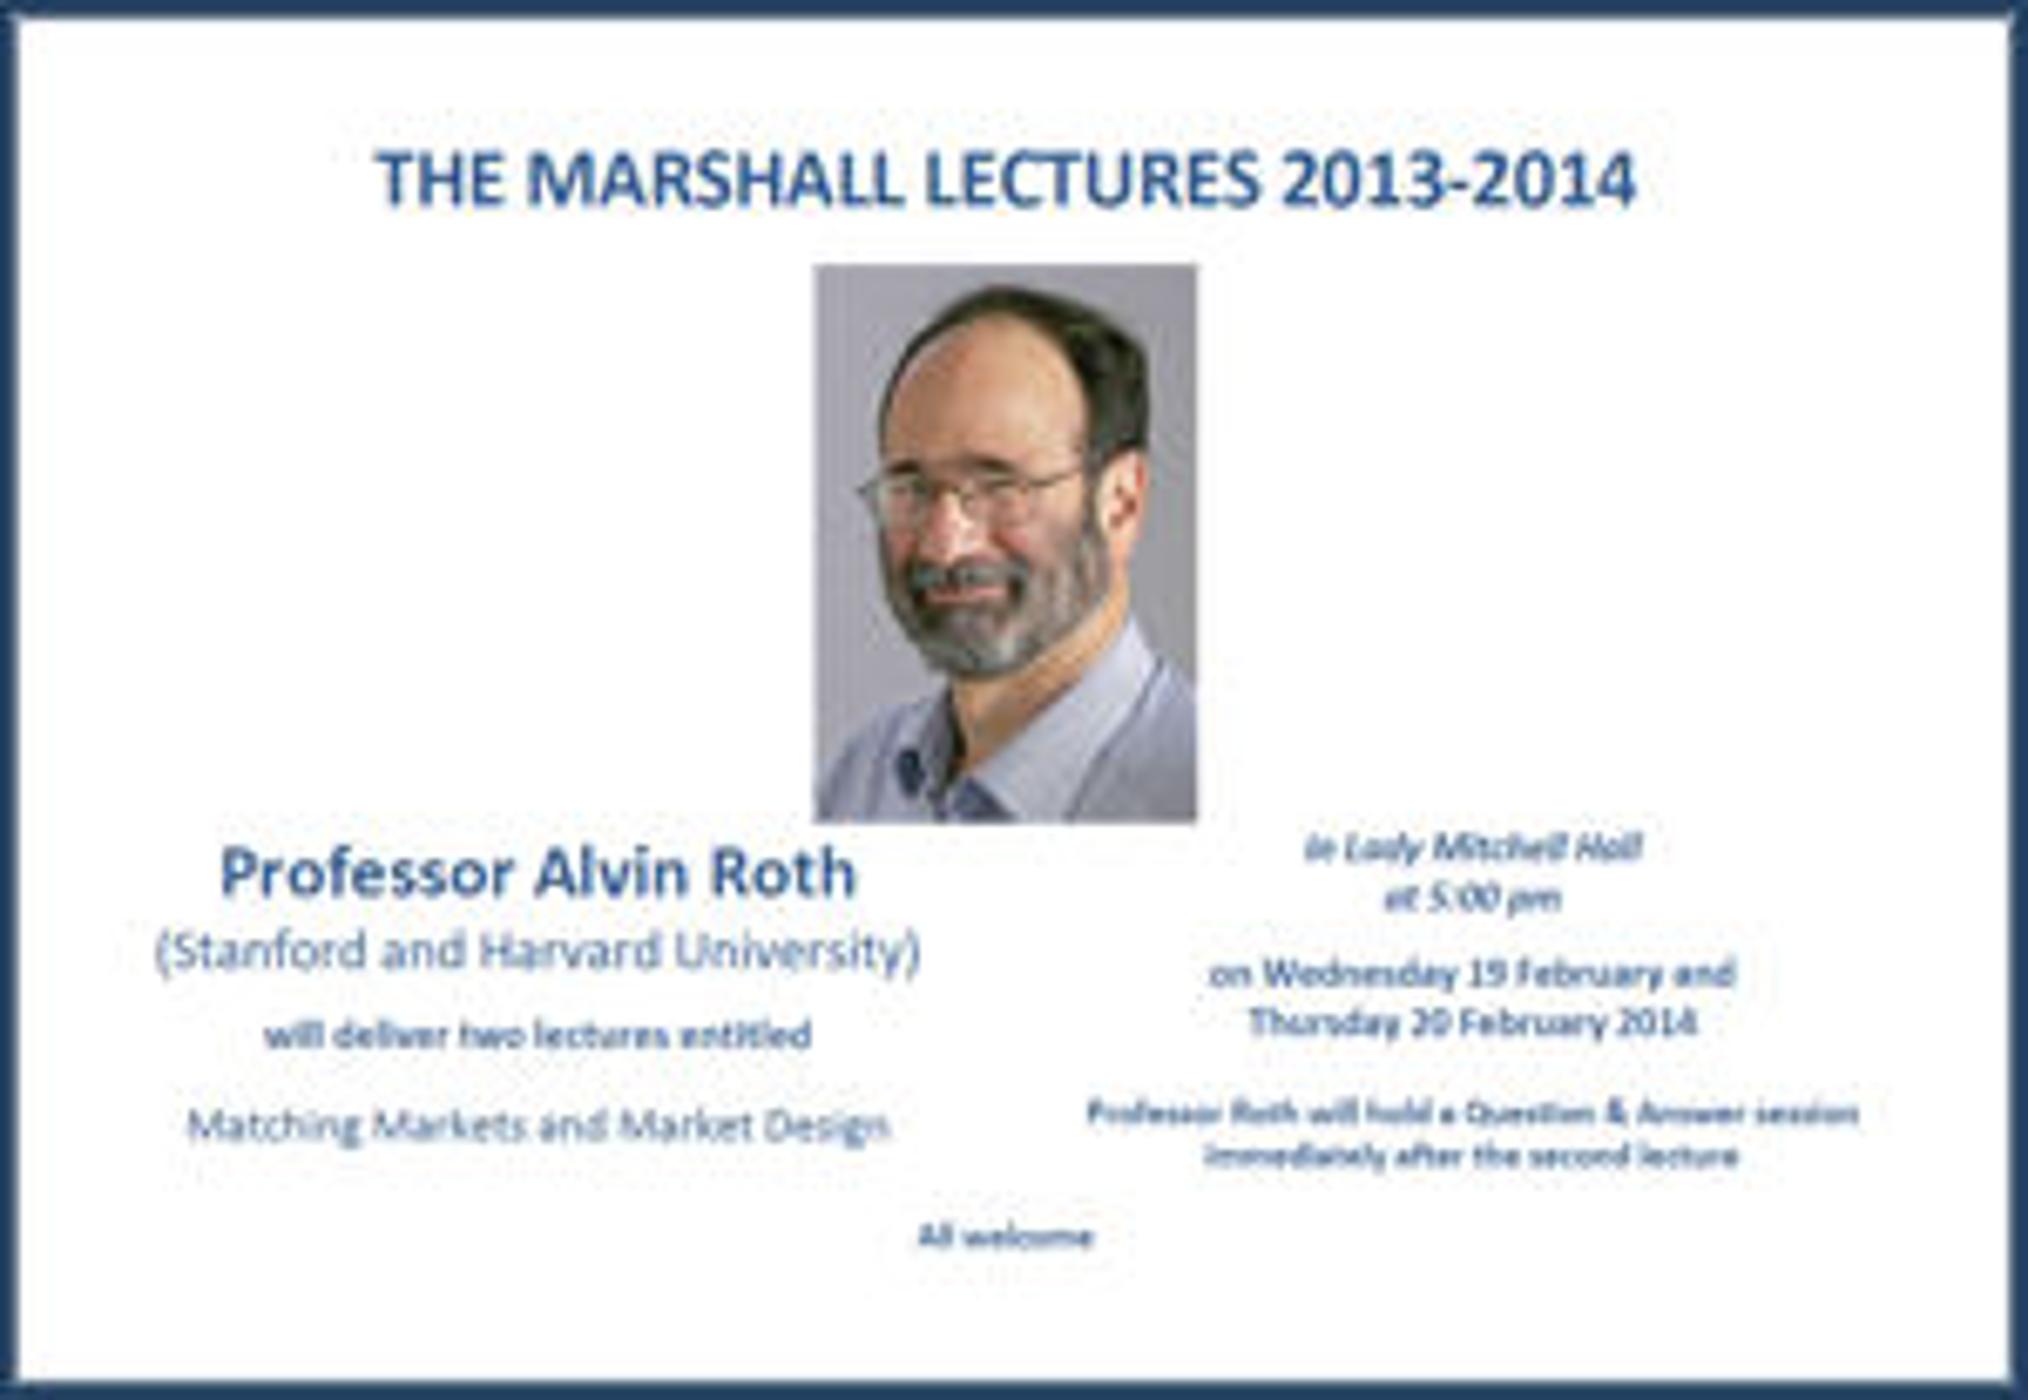 Marshall Lecture 2013-2014 Professor Alvin Roth - Matching Markets and Market Design - Lecture 1